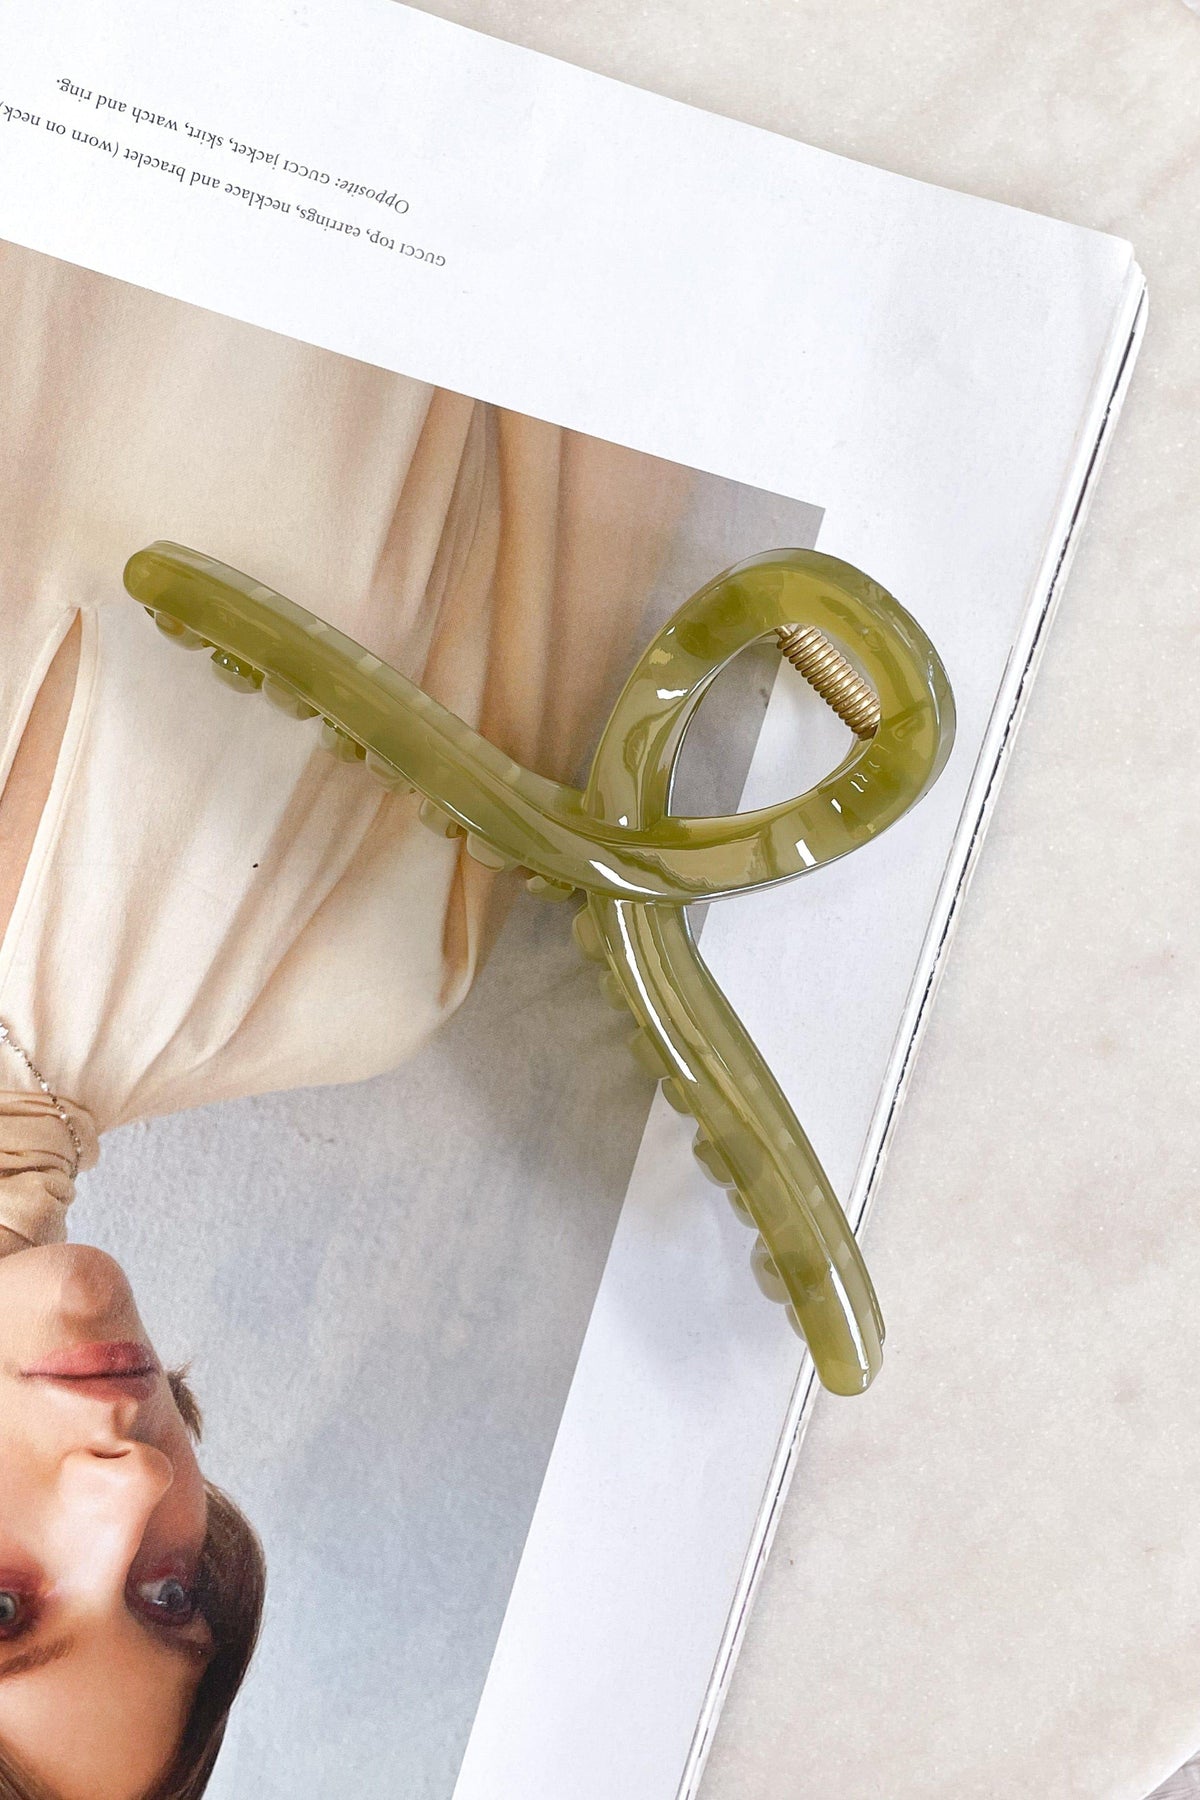 Neptune hair clip, , Our New Neptune hair clip Is Now Only $16.00 Exclusive At Mishkah, We Have The Latest Fashion Accessories @ Mishkah Online Fashion Boutique Our New Neptune hair clip is now only $16.00-MISHKAH